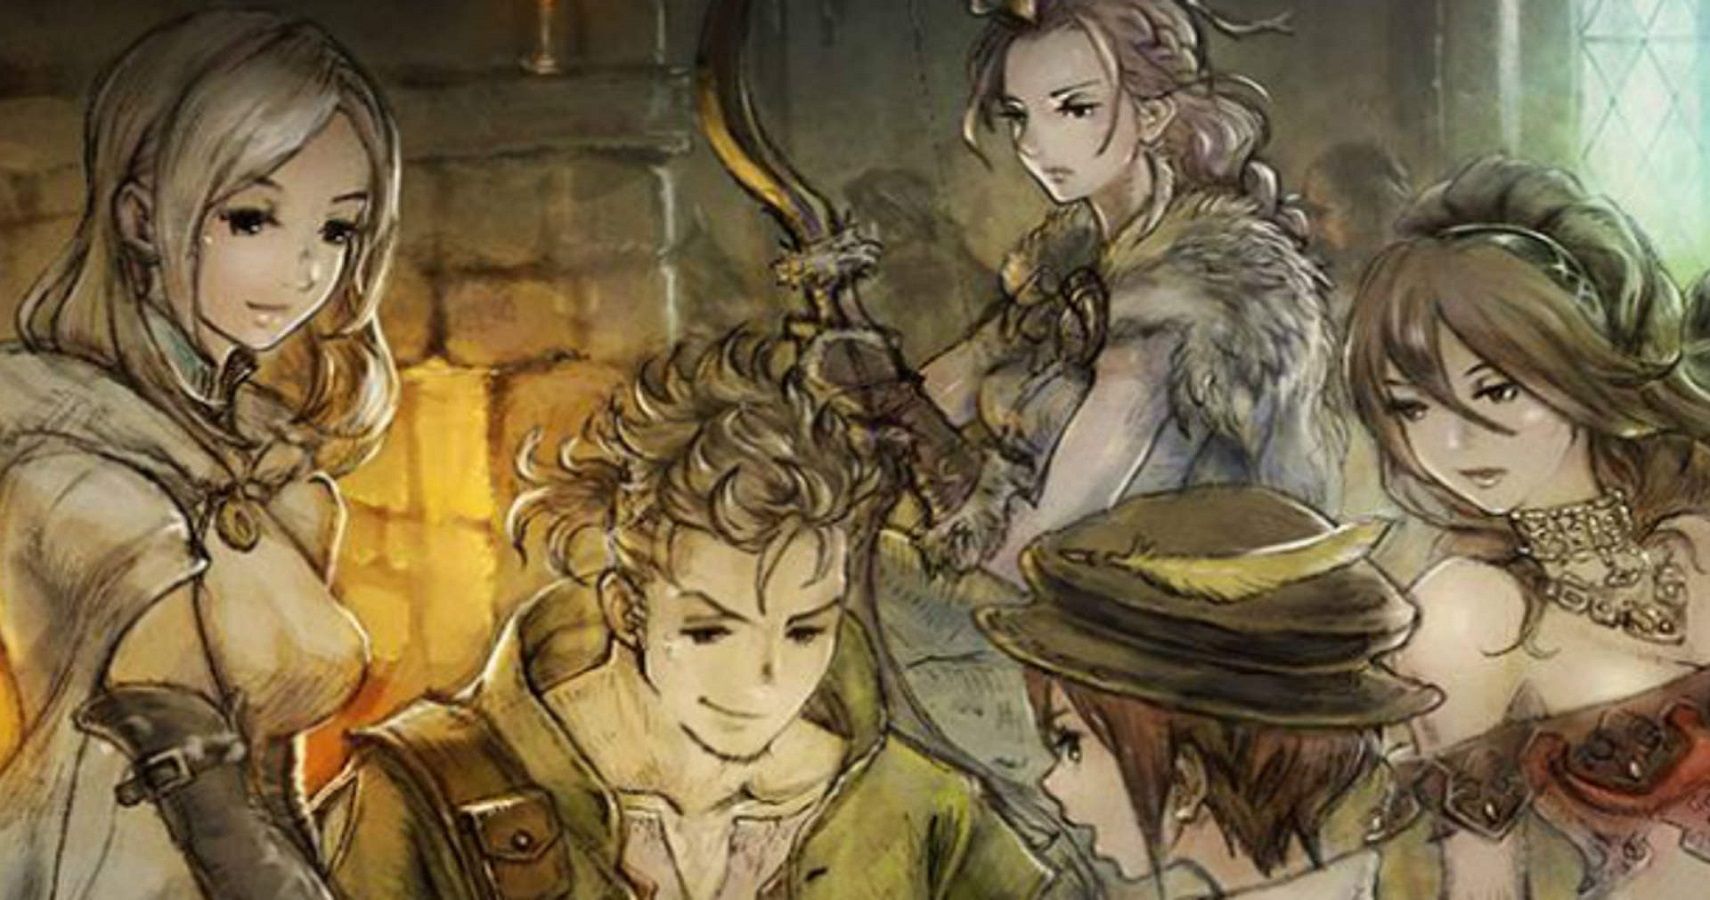 Octopath Traveler Alfyn’s Story Was Actually Better Than Primrose’s Story If You Break It Down